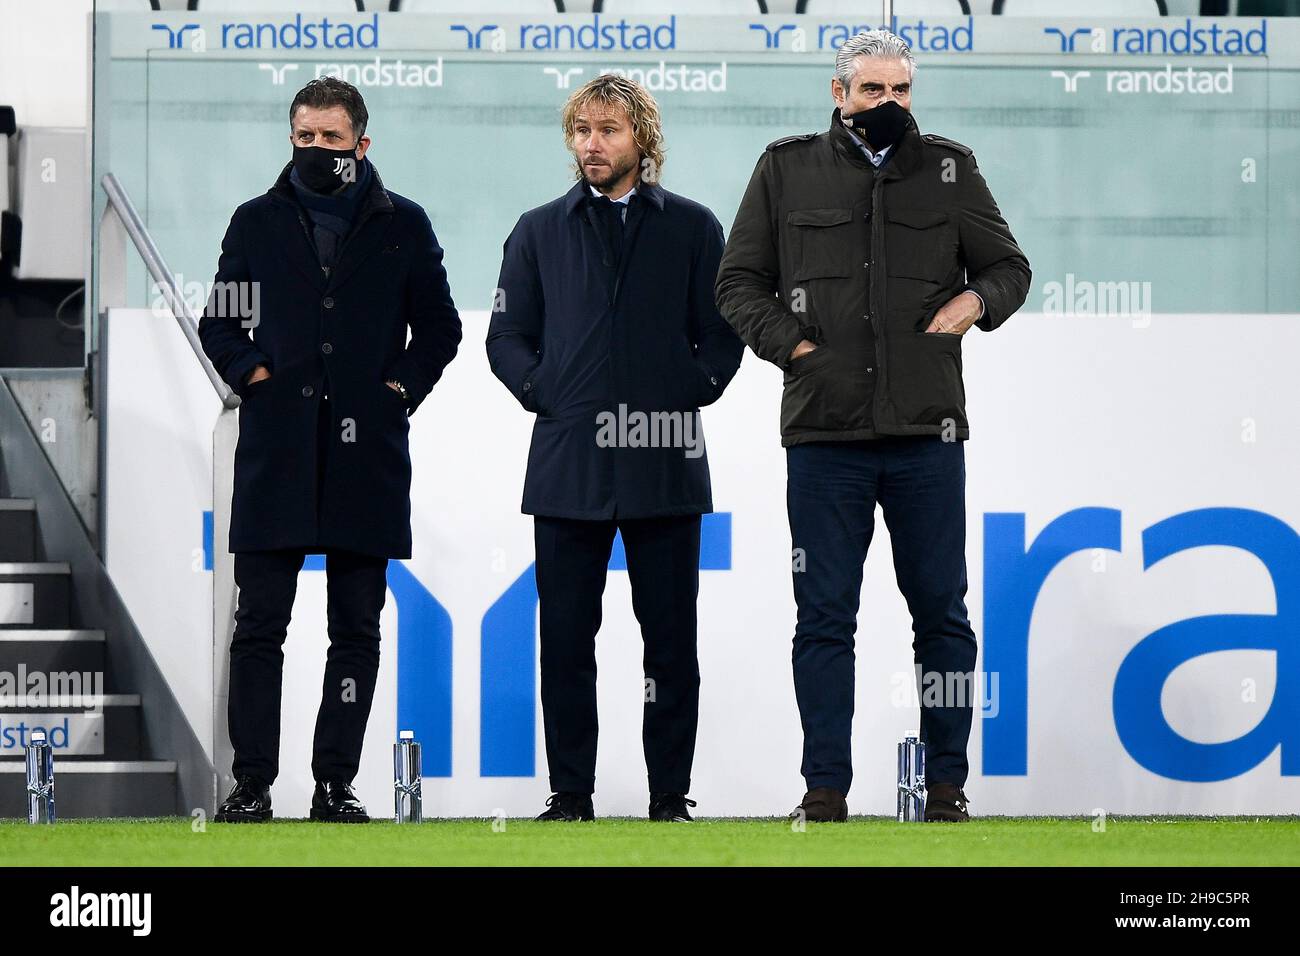 Pavel Nedved L High Resolution Stock Photography and Images - Alamy